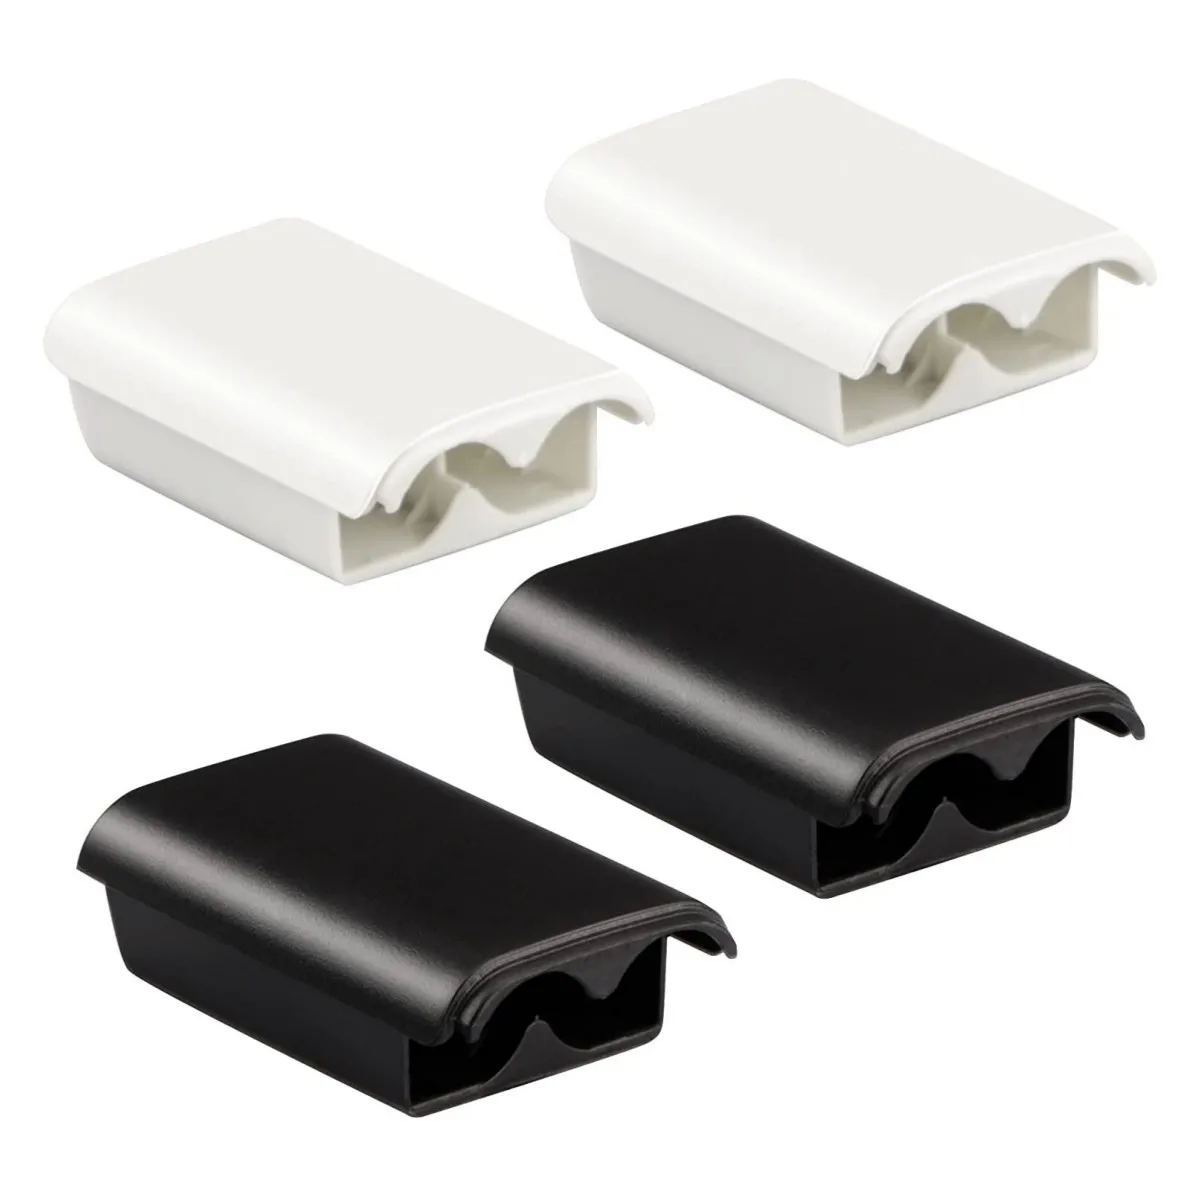 

500pcs/lot Black & white Battery Case Cover Shell For Xbox 360/xbox360 Wireless Controller Rechargeable Battery